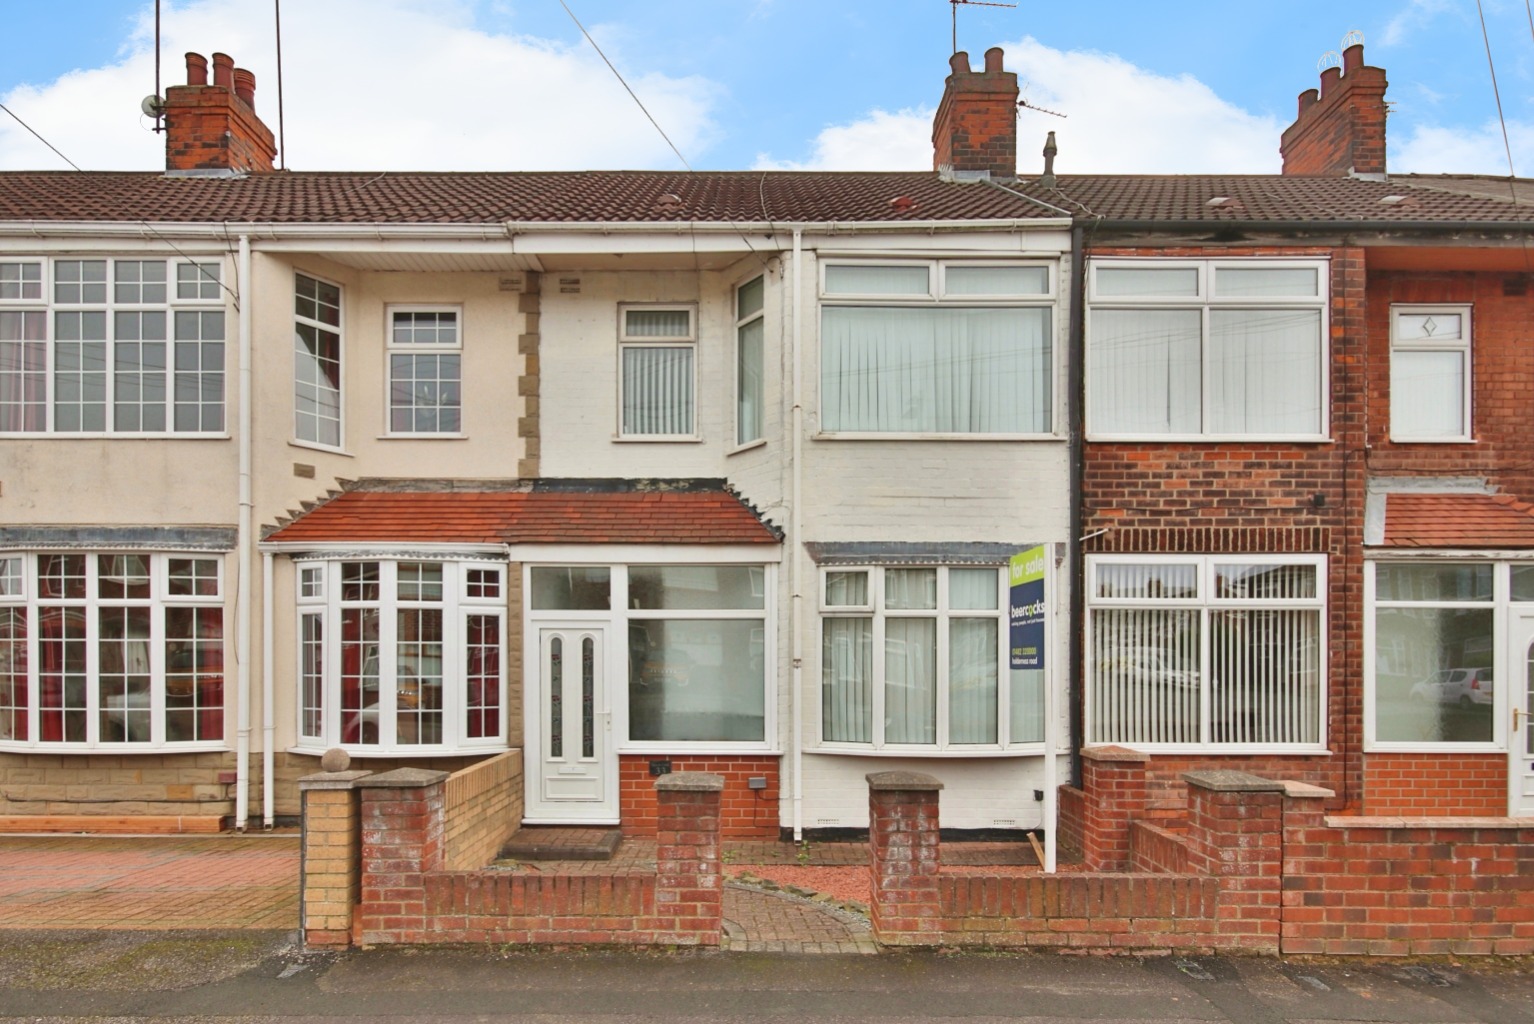 3 bed terraced house for sale in Sherwood Avenue, Hull - Property Image 1